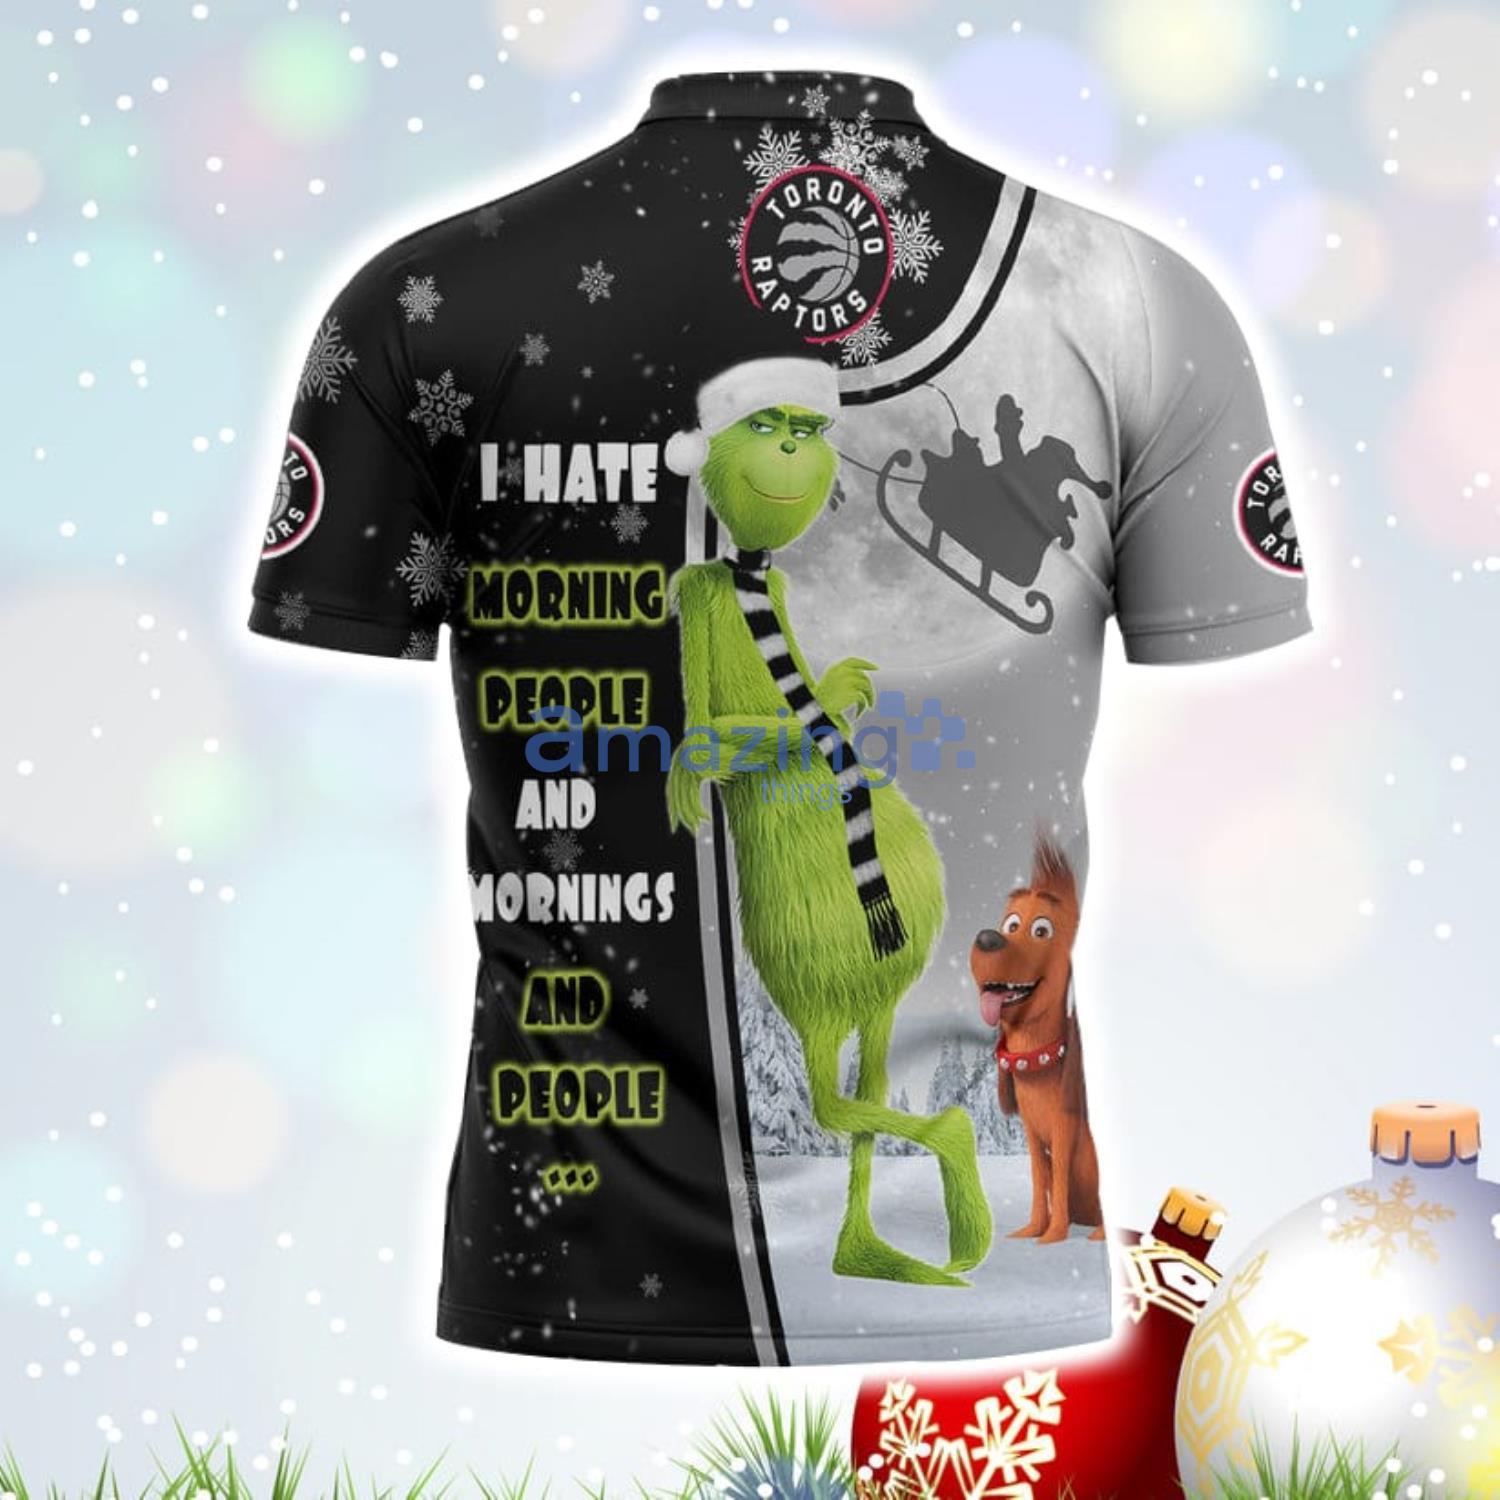 Toronto Raptors Grinch jersey shows how fans feel about Christmas